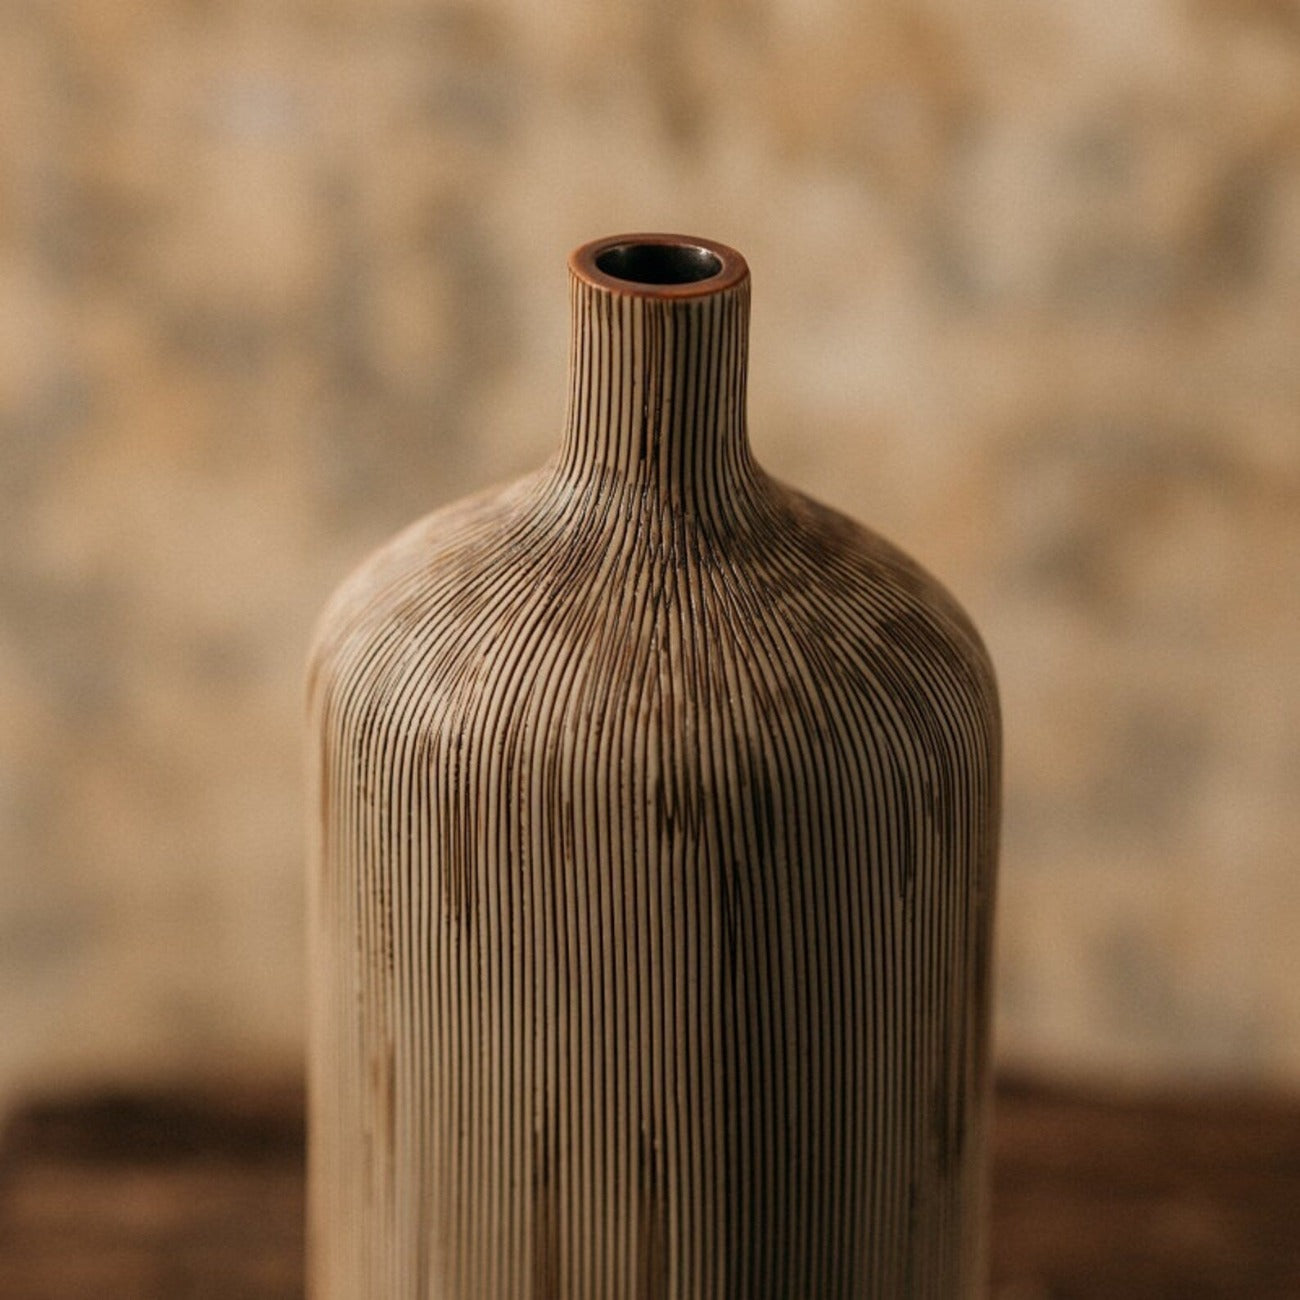 Straight Pinched Neck Vase with Brown Score